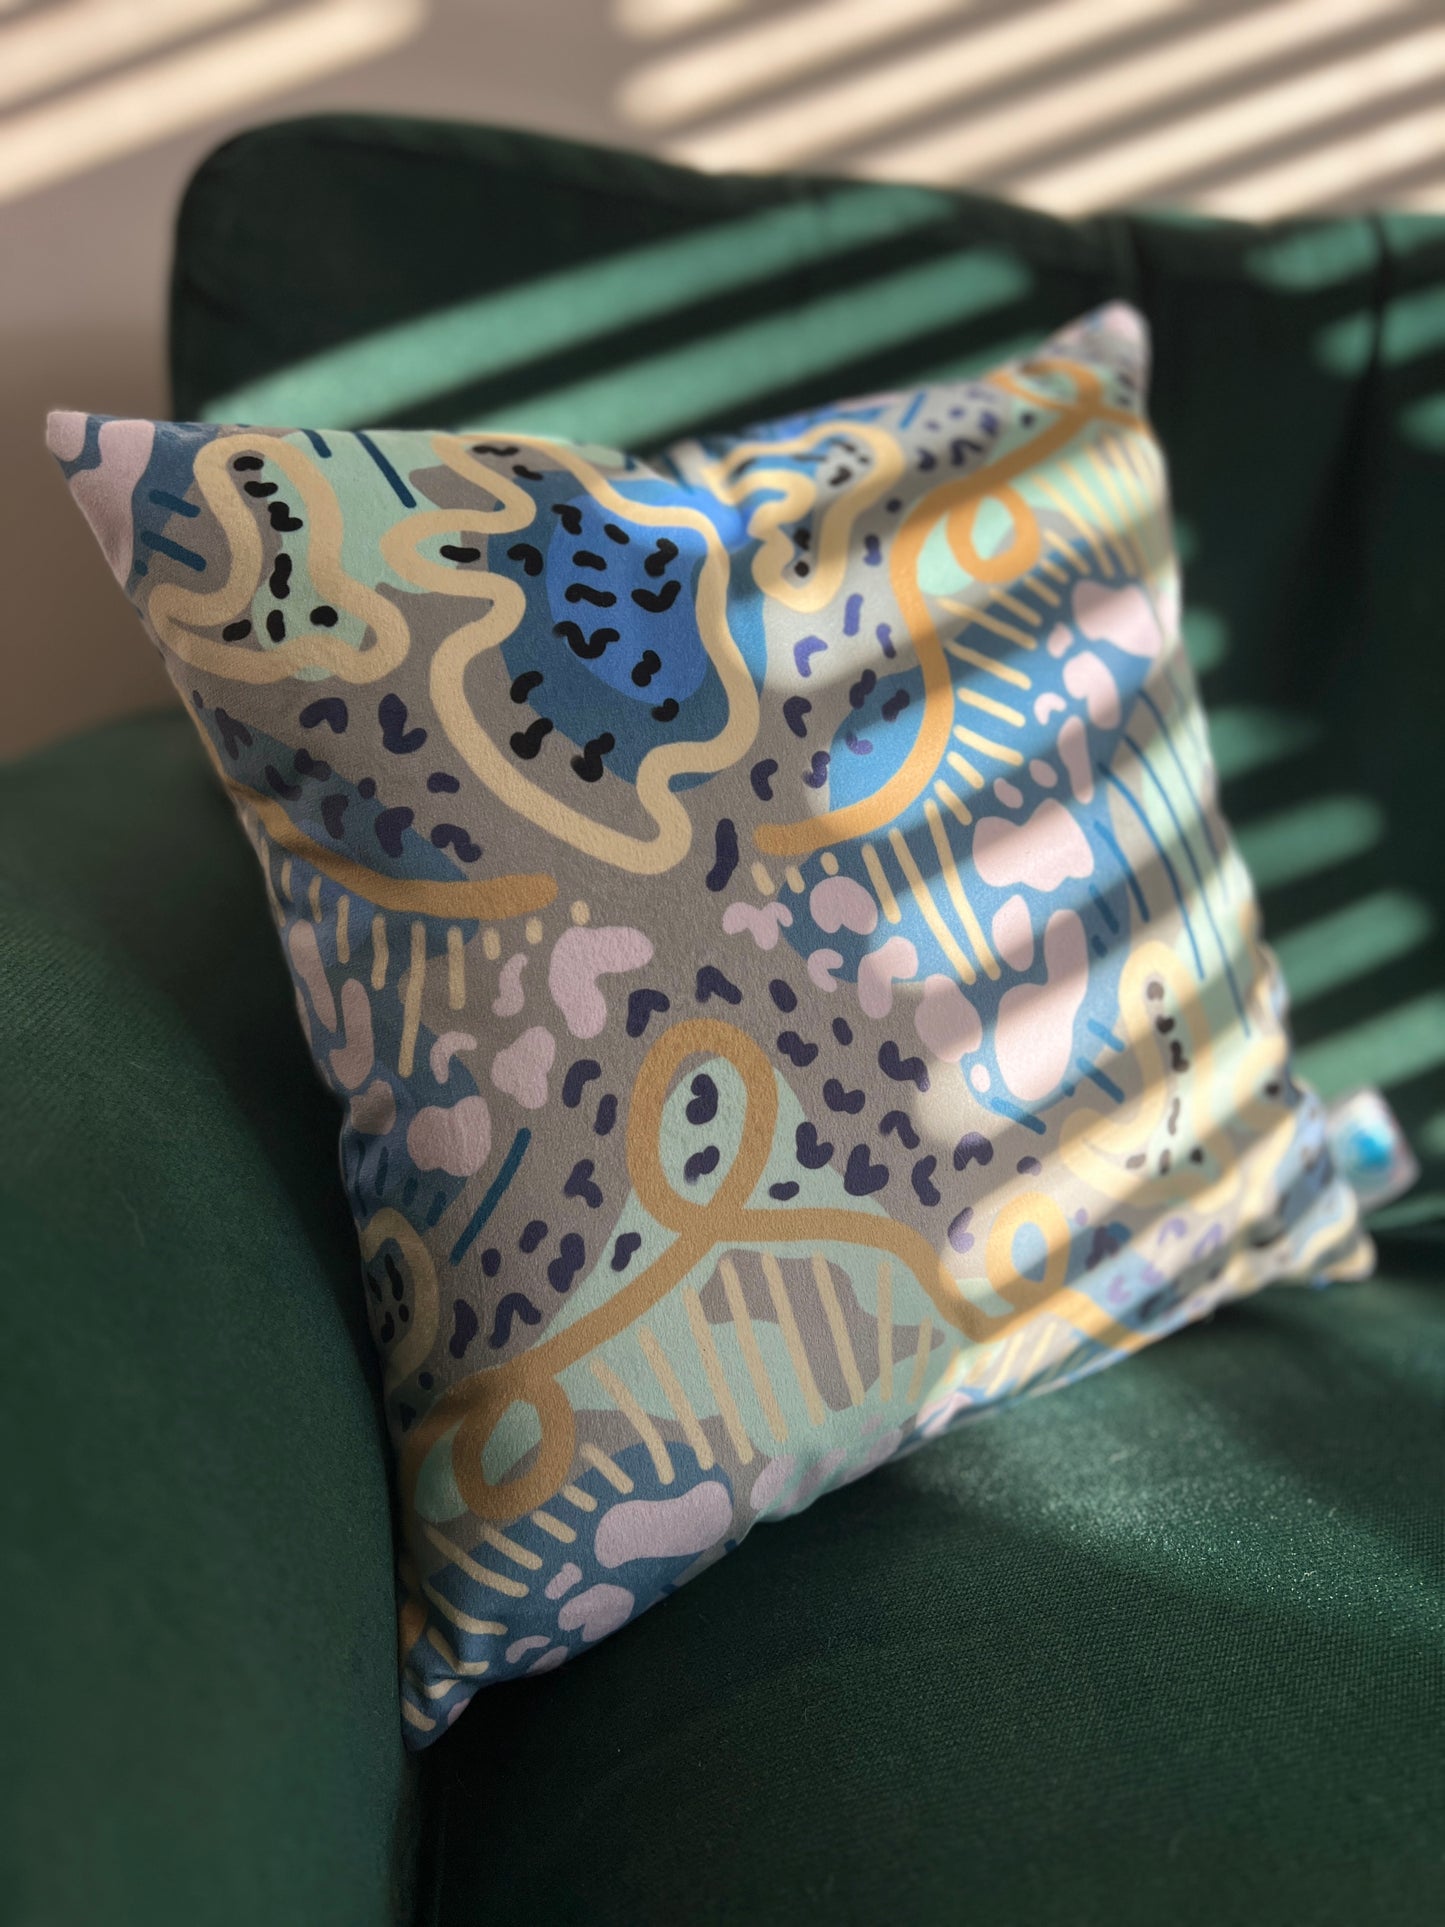 Blues, greens and yellows swirling lines and abstract shapes make up this cushion which is placed on a deep green sofa with stripes of sunlight illuminating part of the velvet fabric.